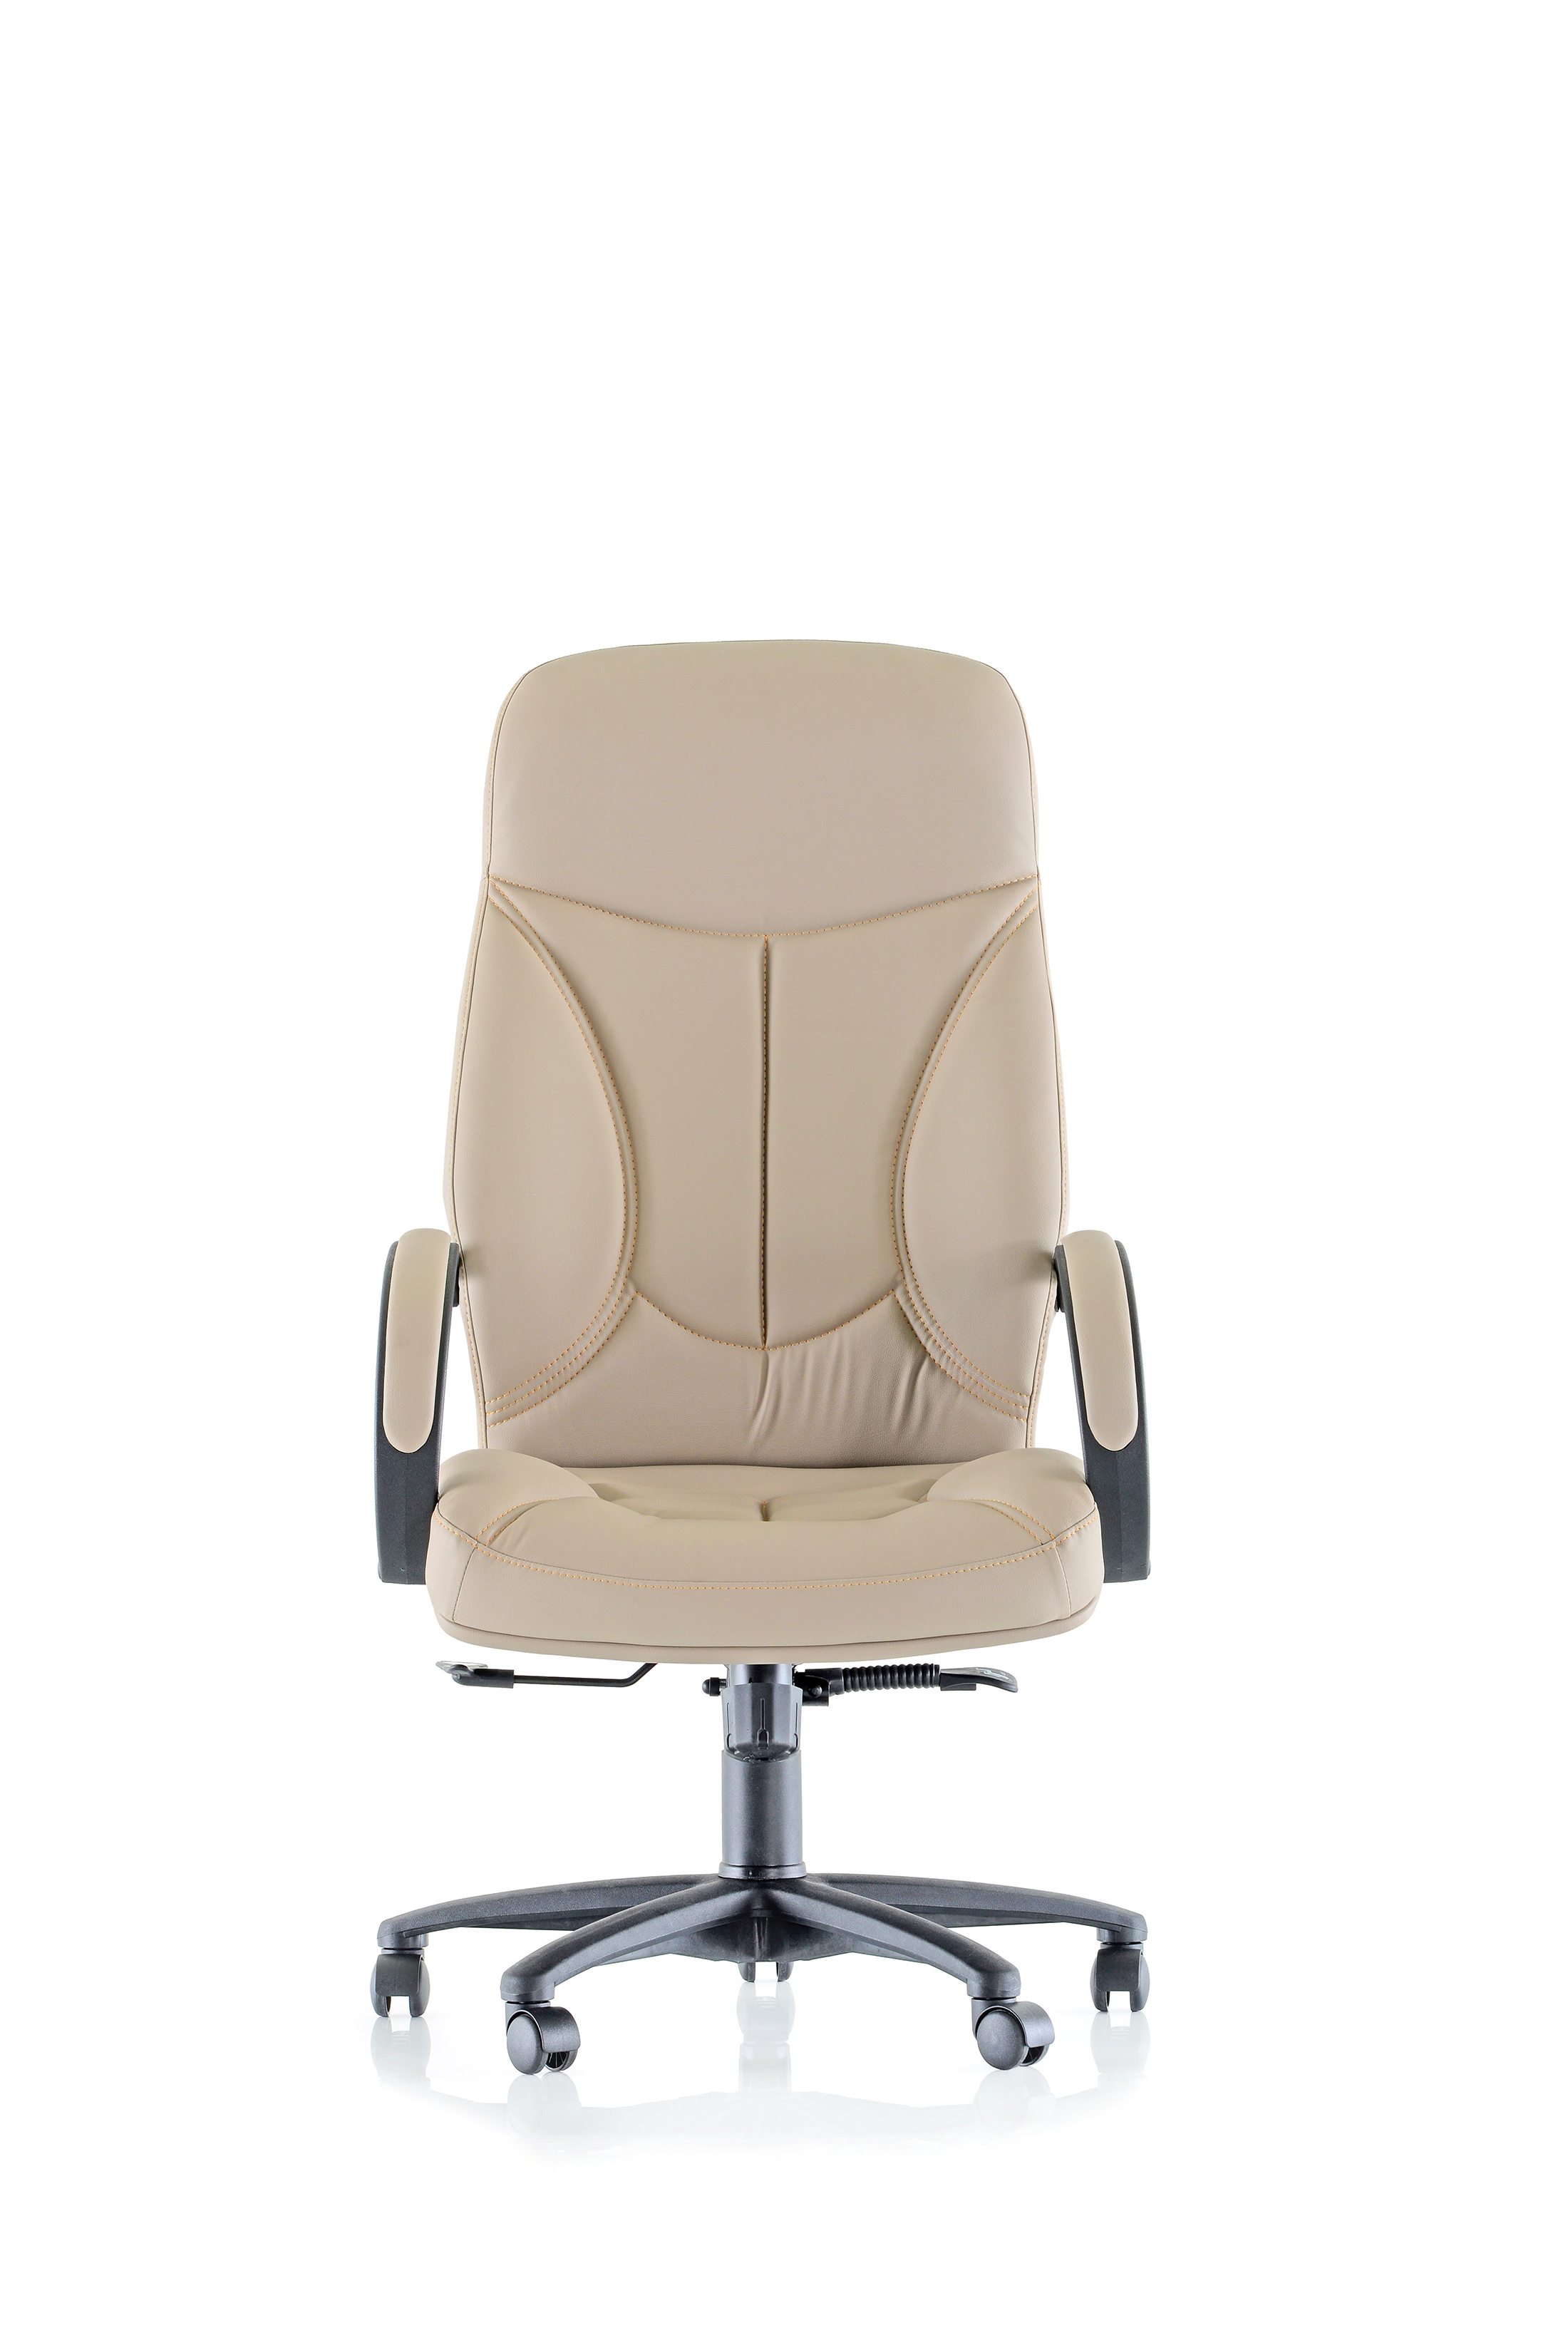 RICCO 000P MANAGER CHAIR